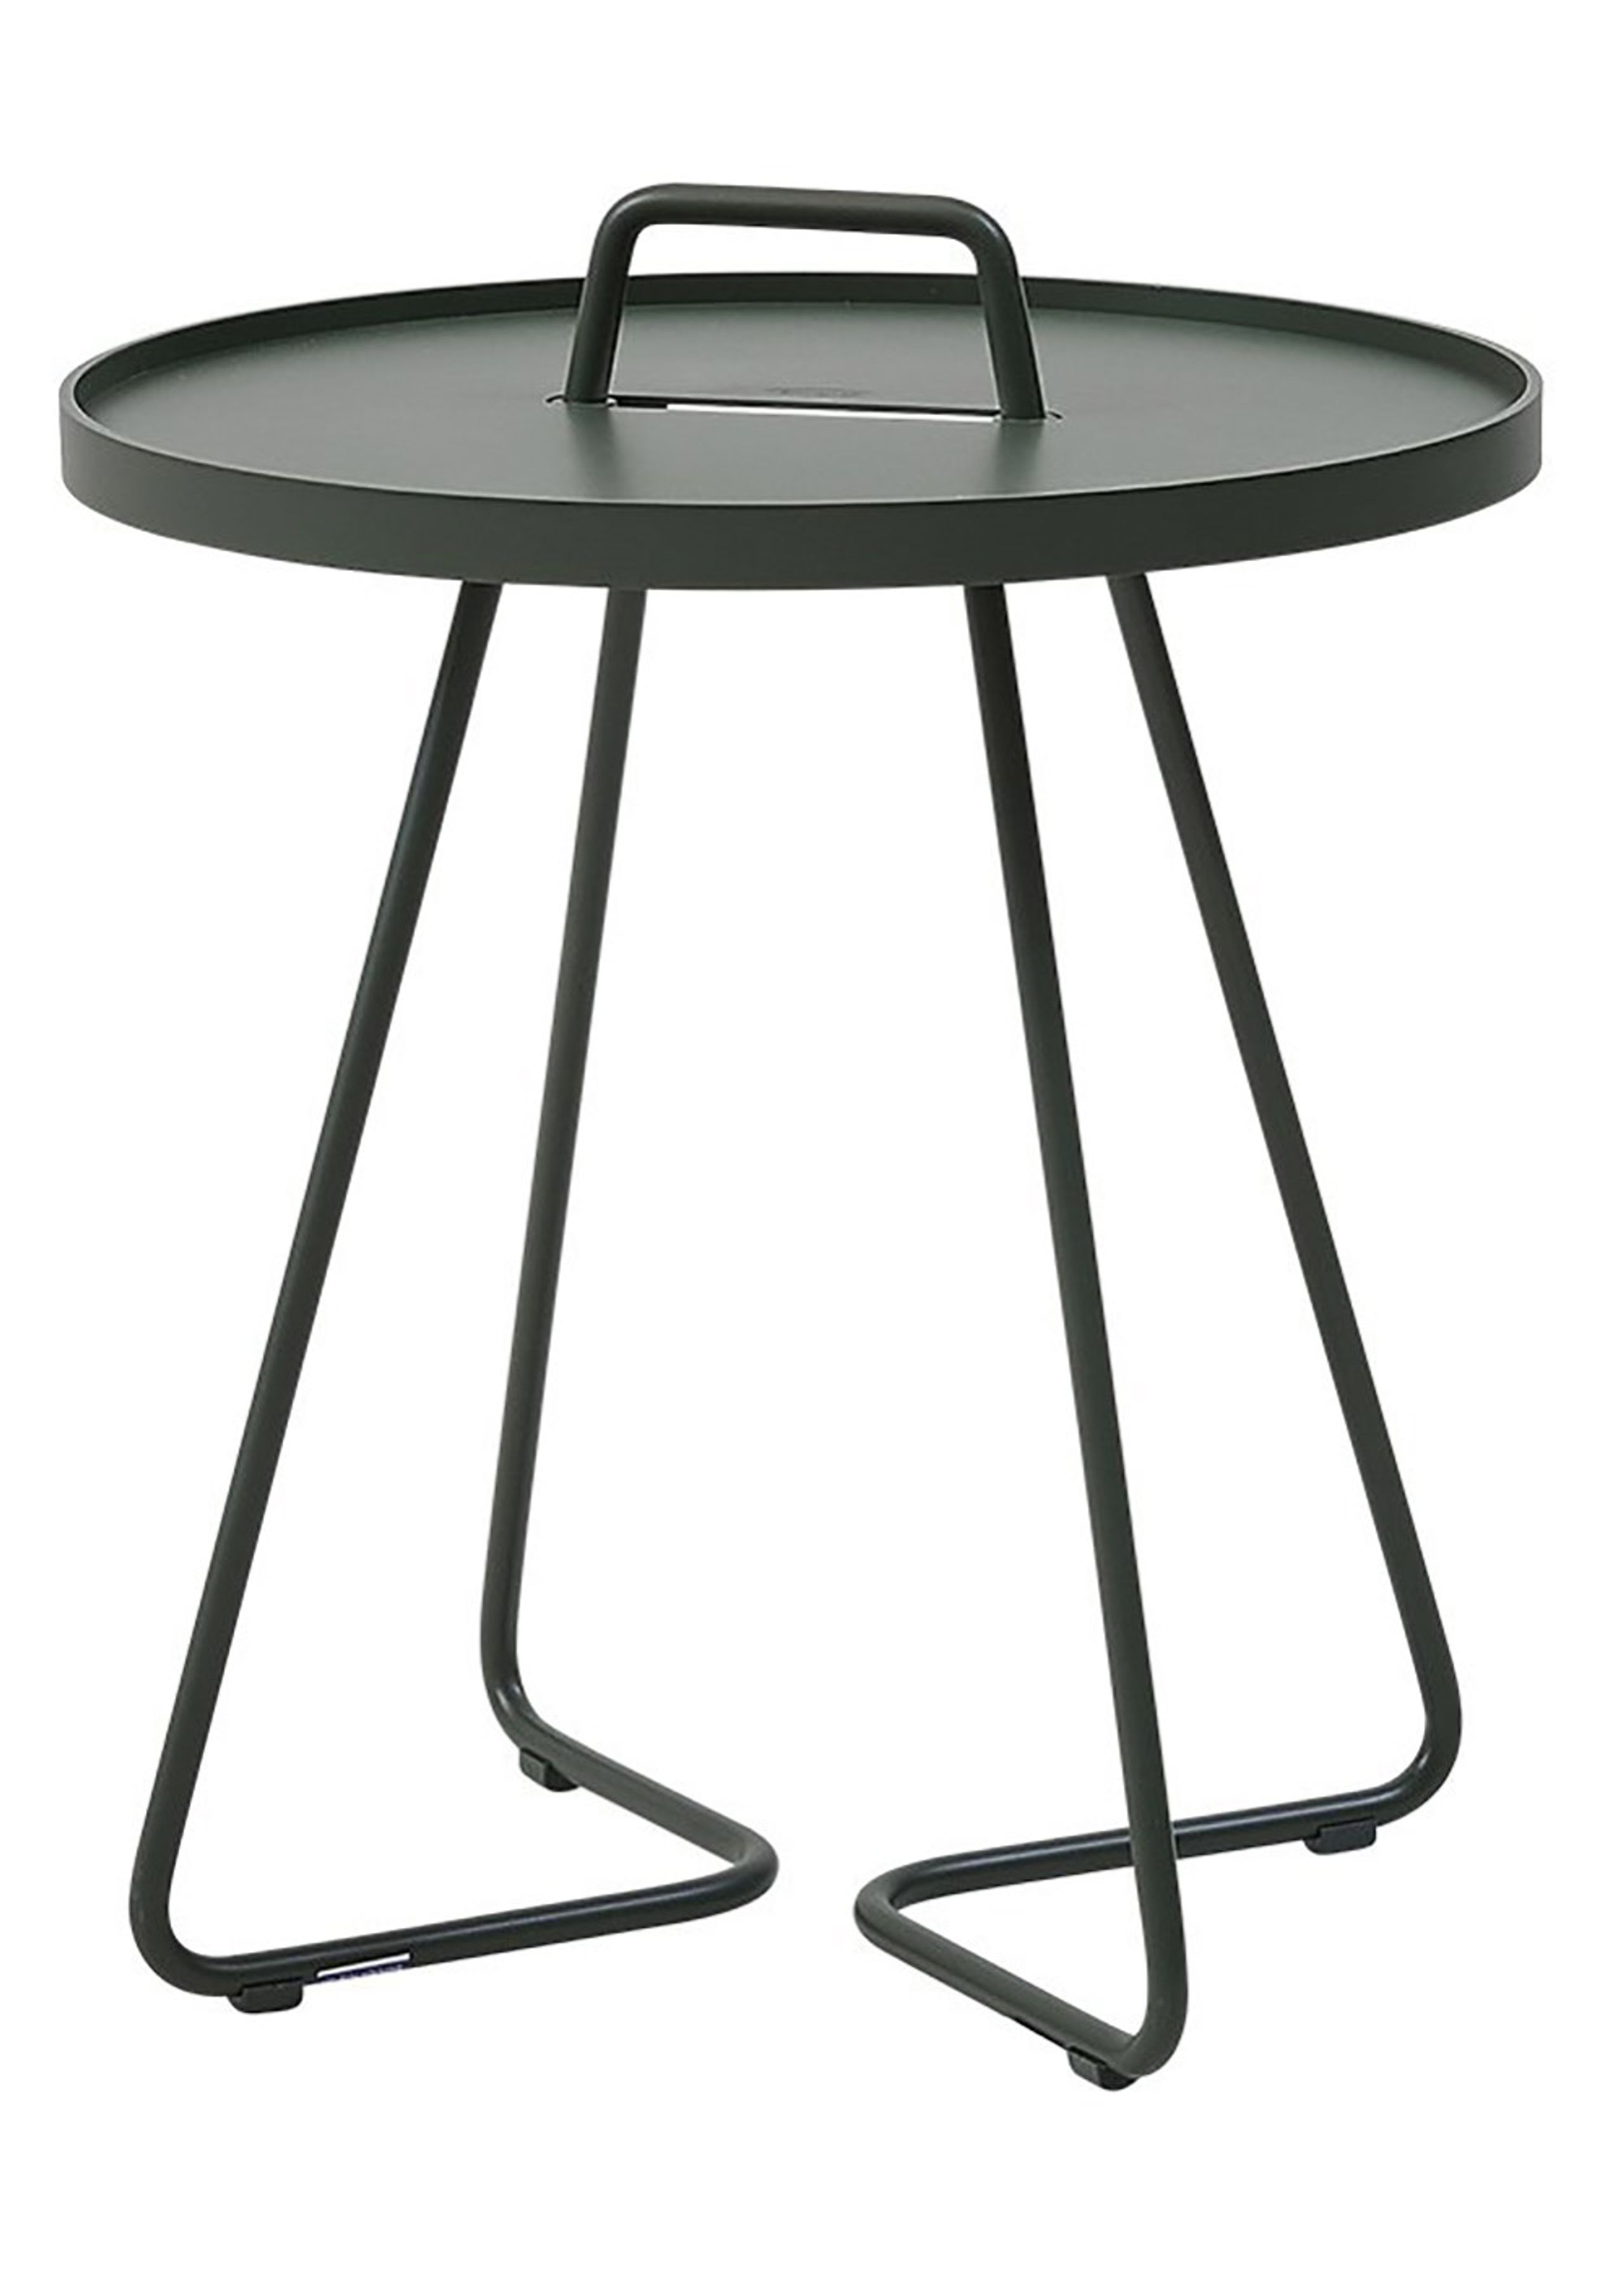 Cane-line -  - On-the-move side table - Dark green - Small